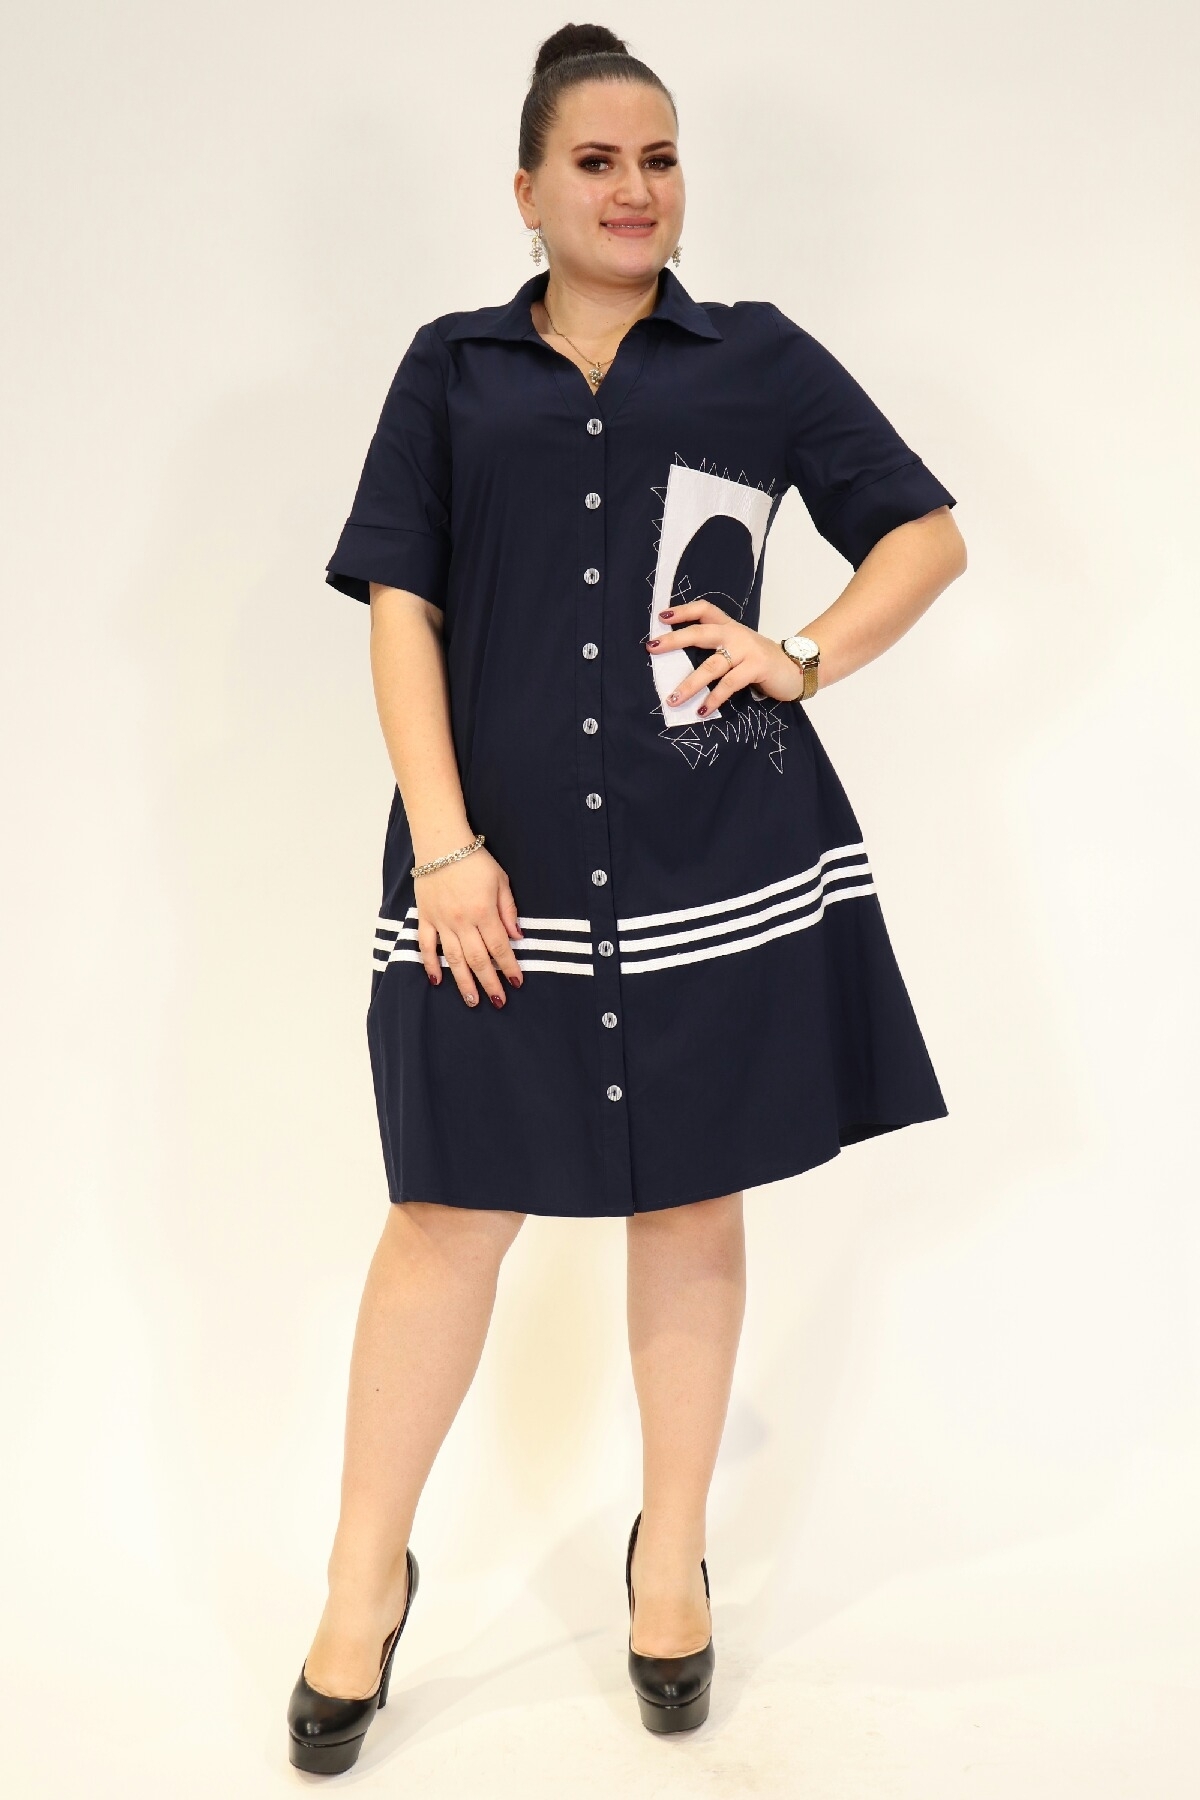 Short sleeve dress with flared button up dress with short sleeves and pockets